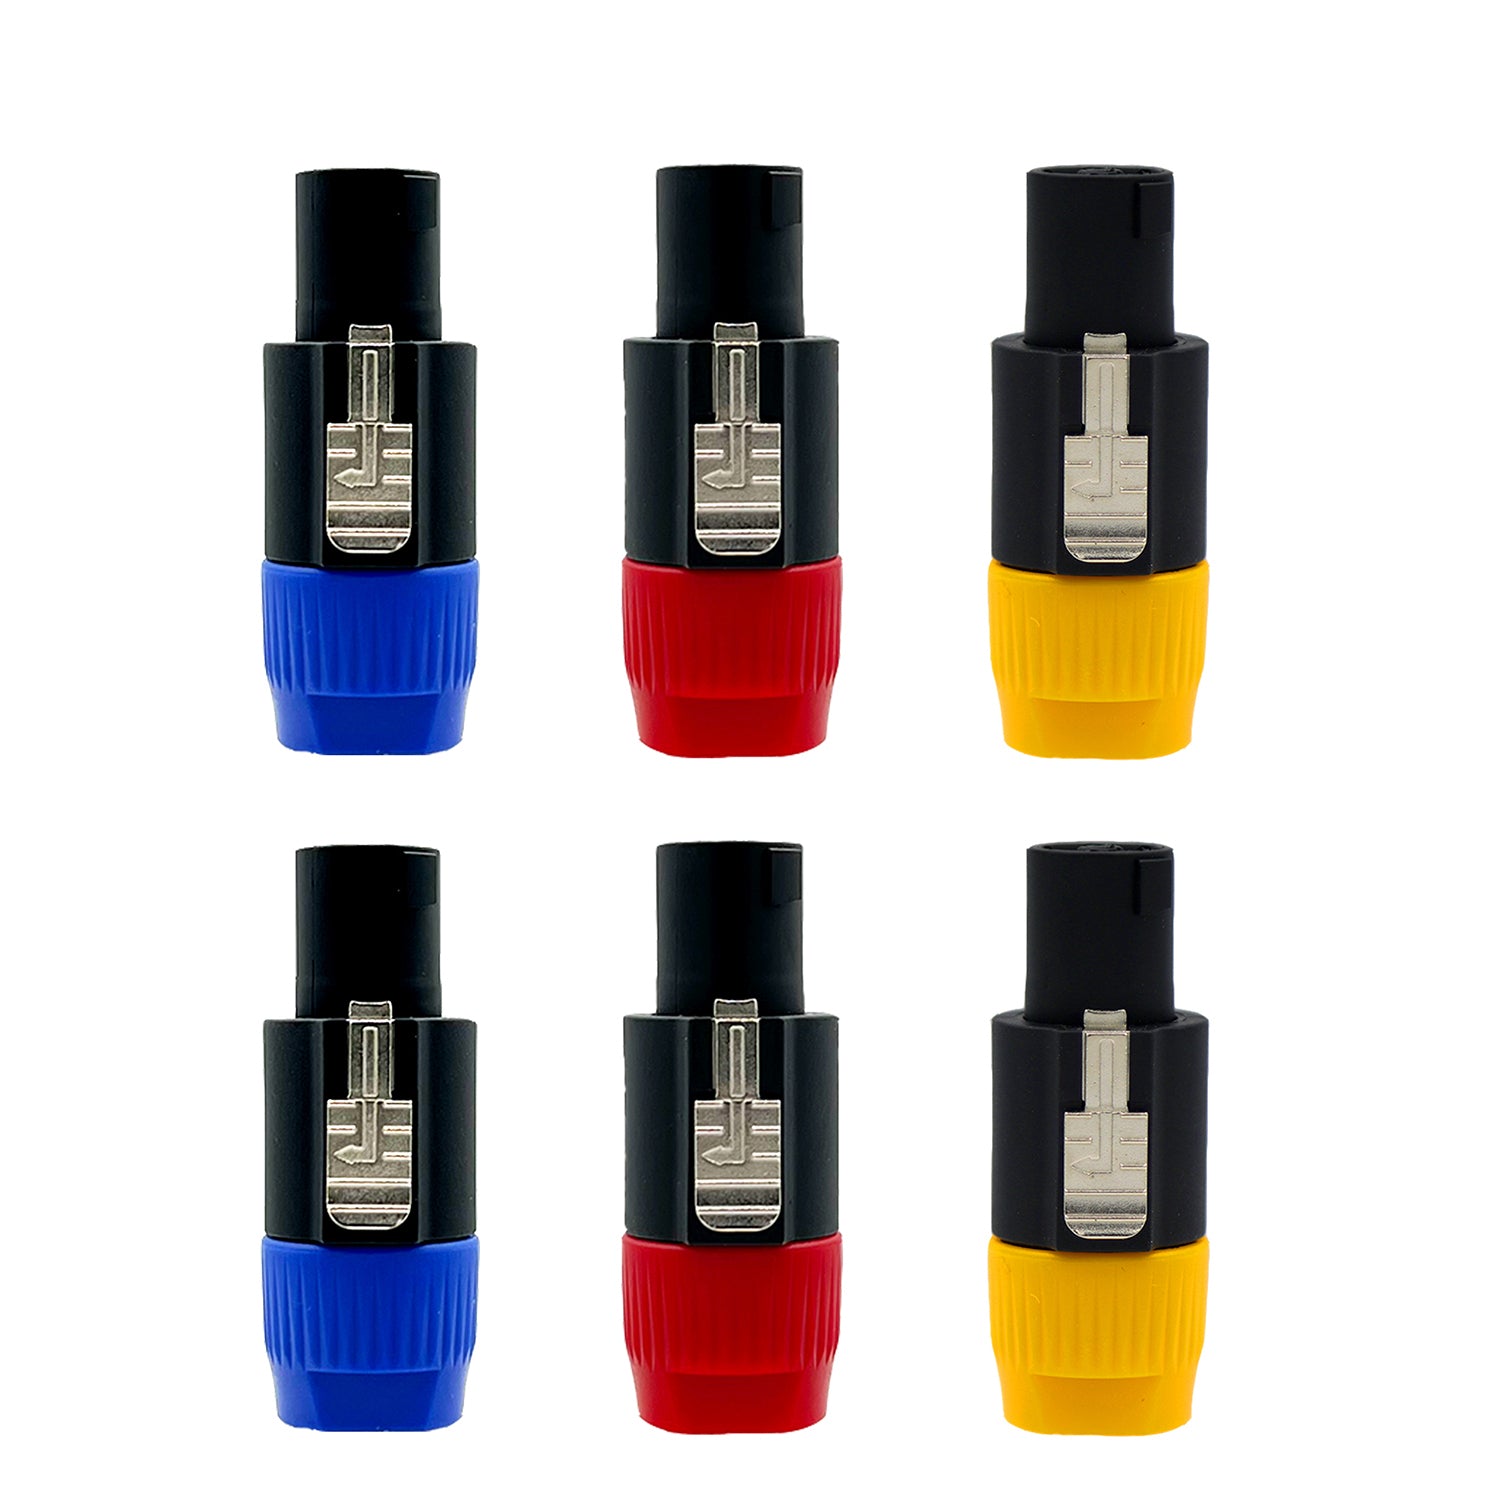 5Core Speakon Adapter 6 Pack  High Quality Audio Jack Male Audio Pin  Speaker Adapter Connector